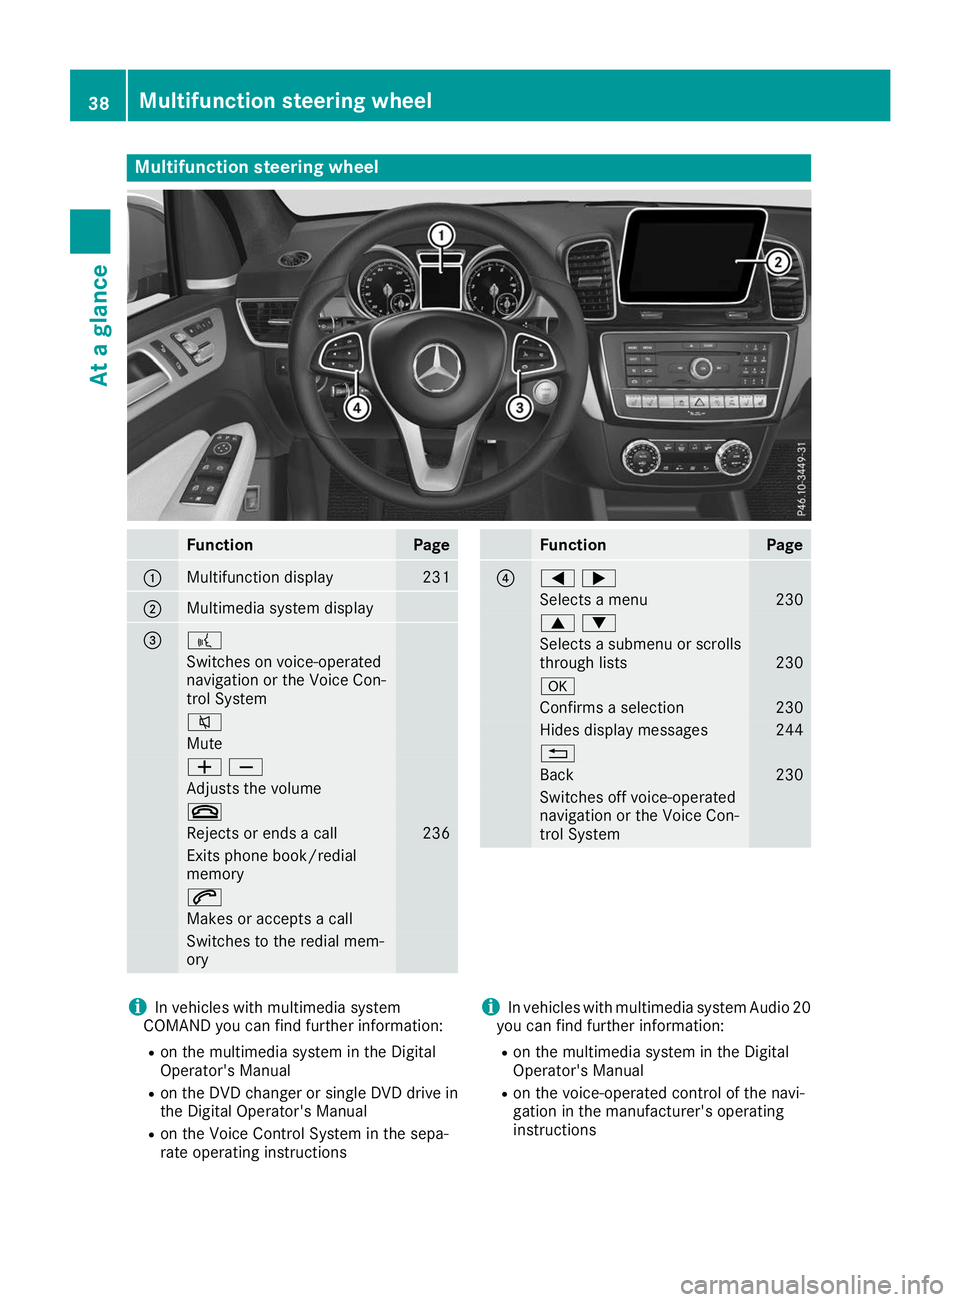 MERCEDES-BENZ GLE SUV 2019 User Guide Multifunction steering wheel
Function Page
0043
Multifunction display 231
0044
Multimedia system display
0087 0059
Switches on voice-operated
navigation or the Voice Con-
trol System
0063
Mute
0081008